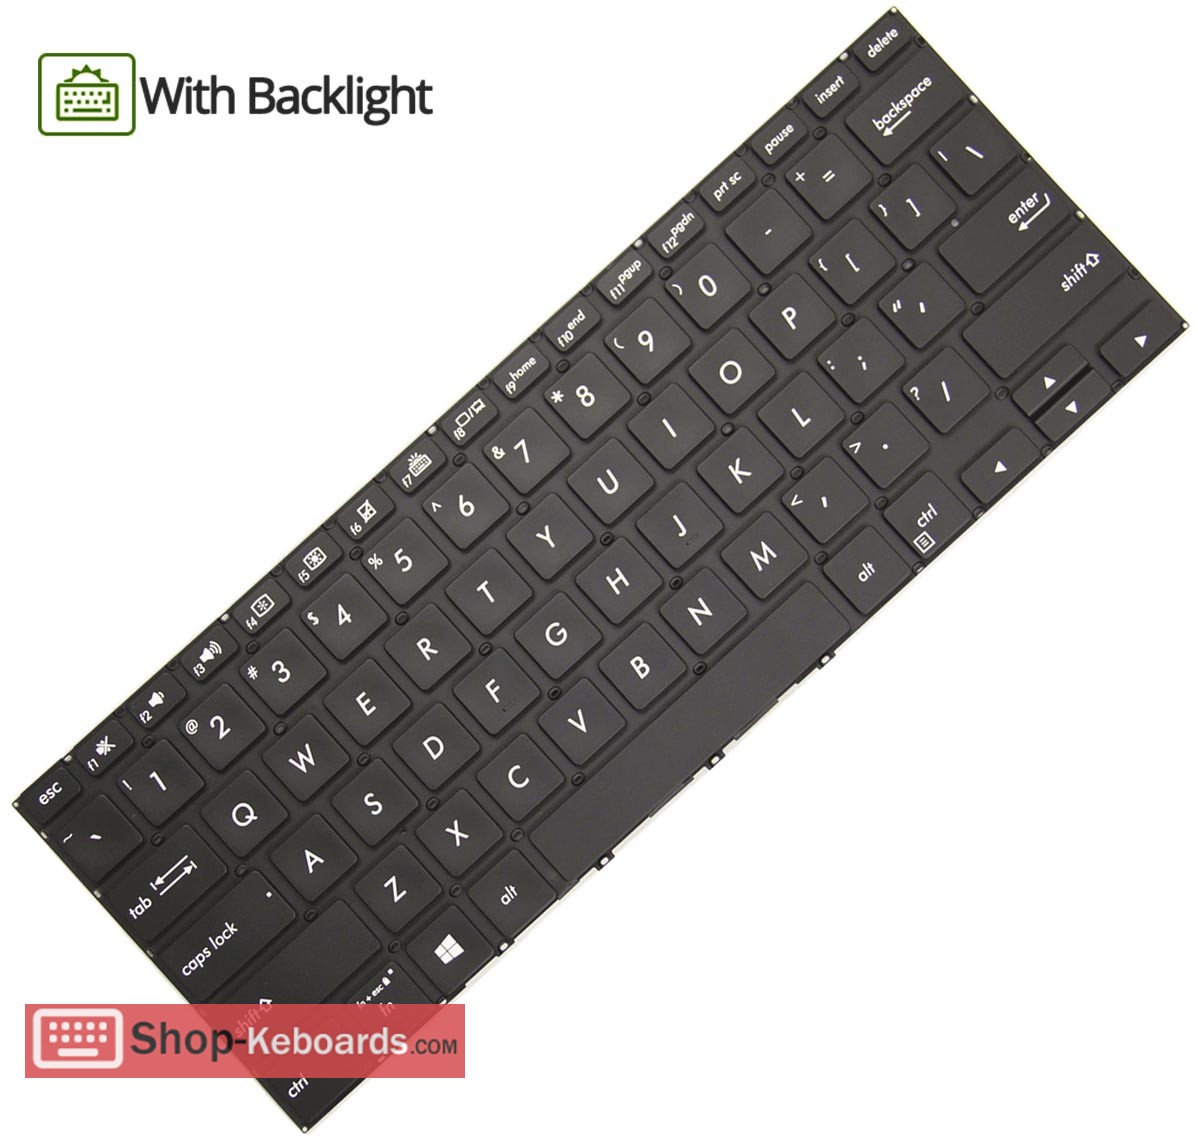 Asus 0KNB0-1626BE00 Keyboard replacement